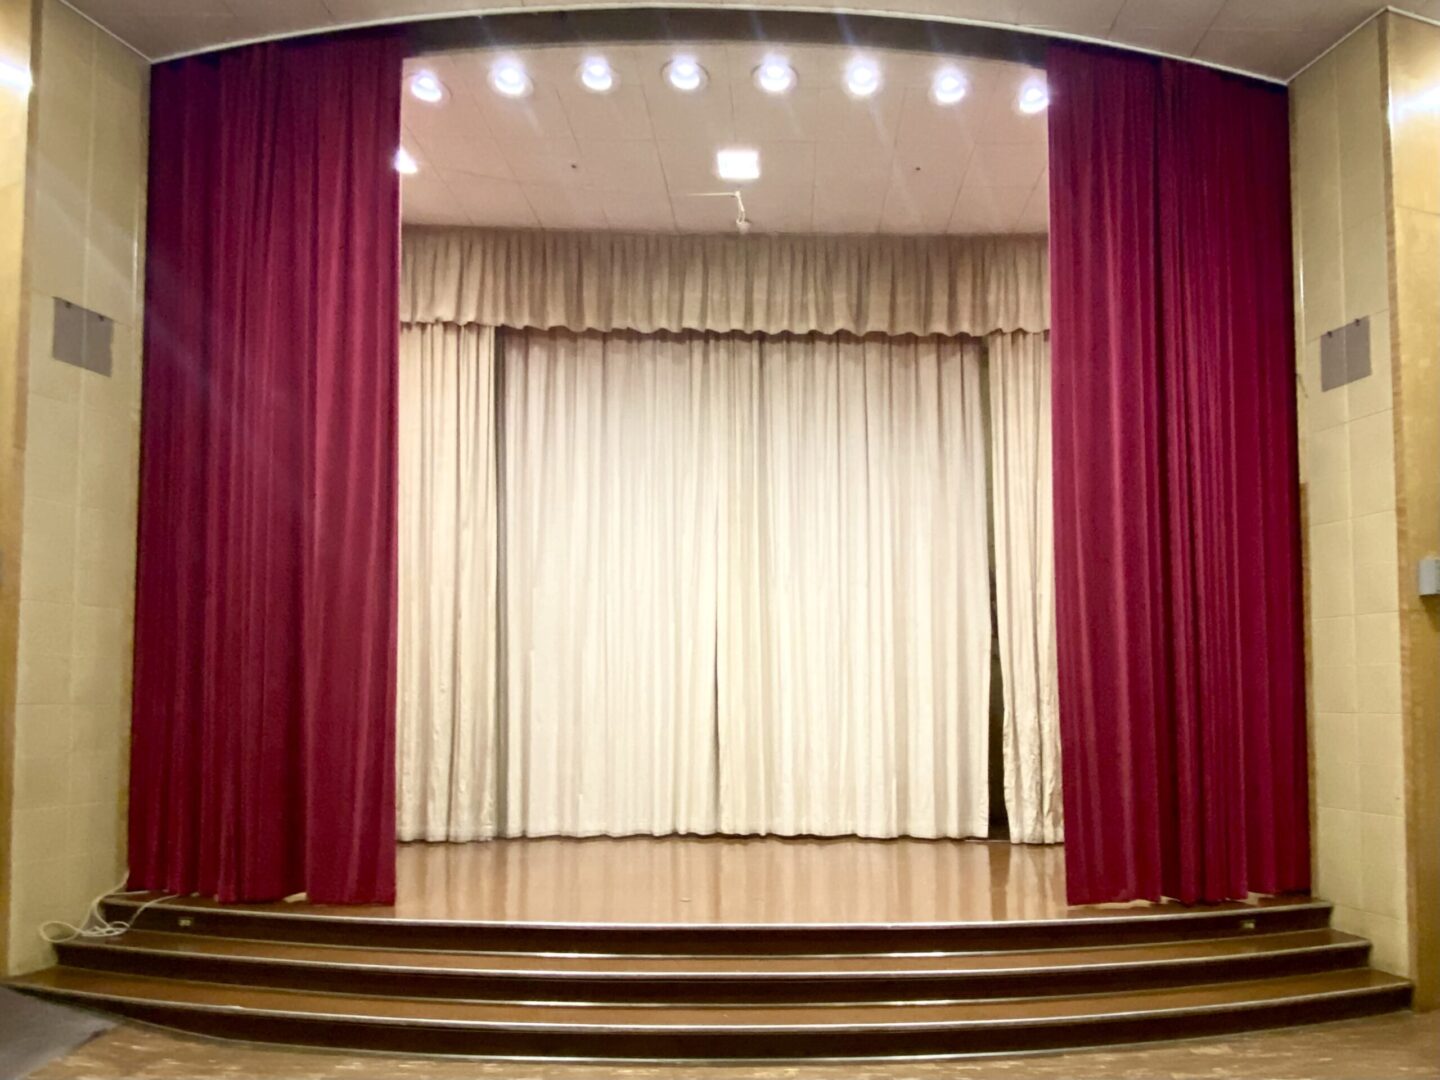 A stage with red and beige curtains